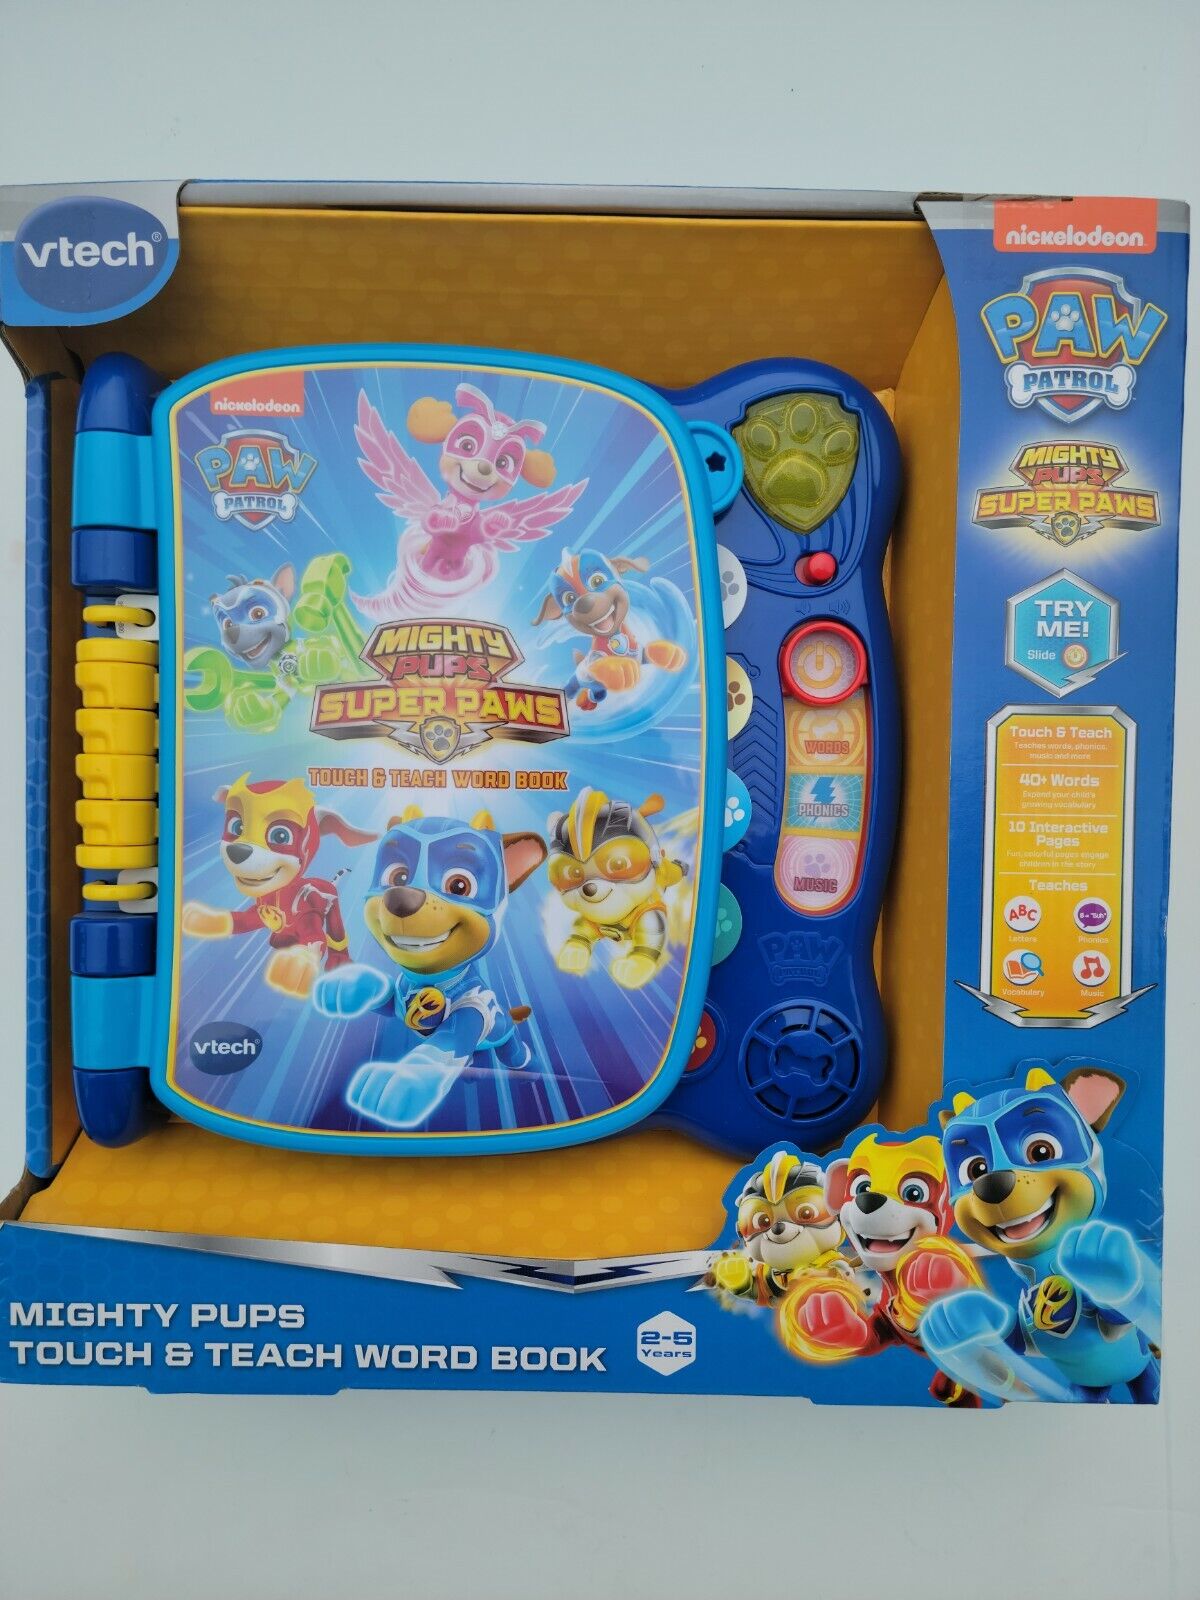 Vtech Mighty Pups Touch Popular & Word Max 76% OFF Teach s the Book.Help